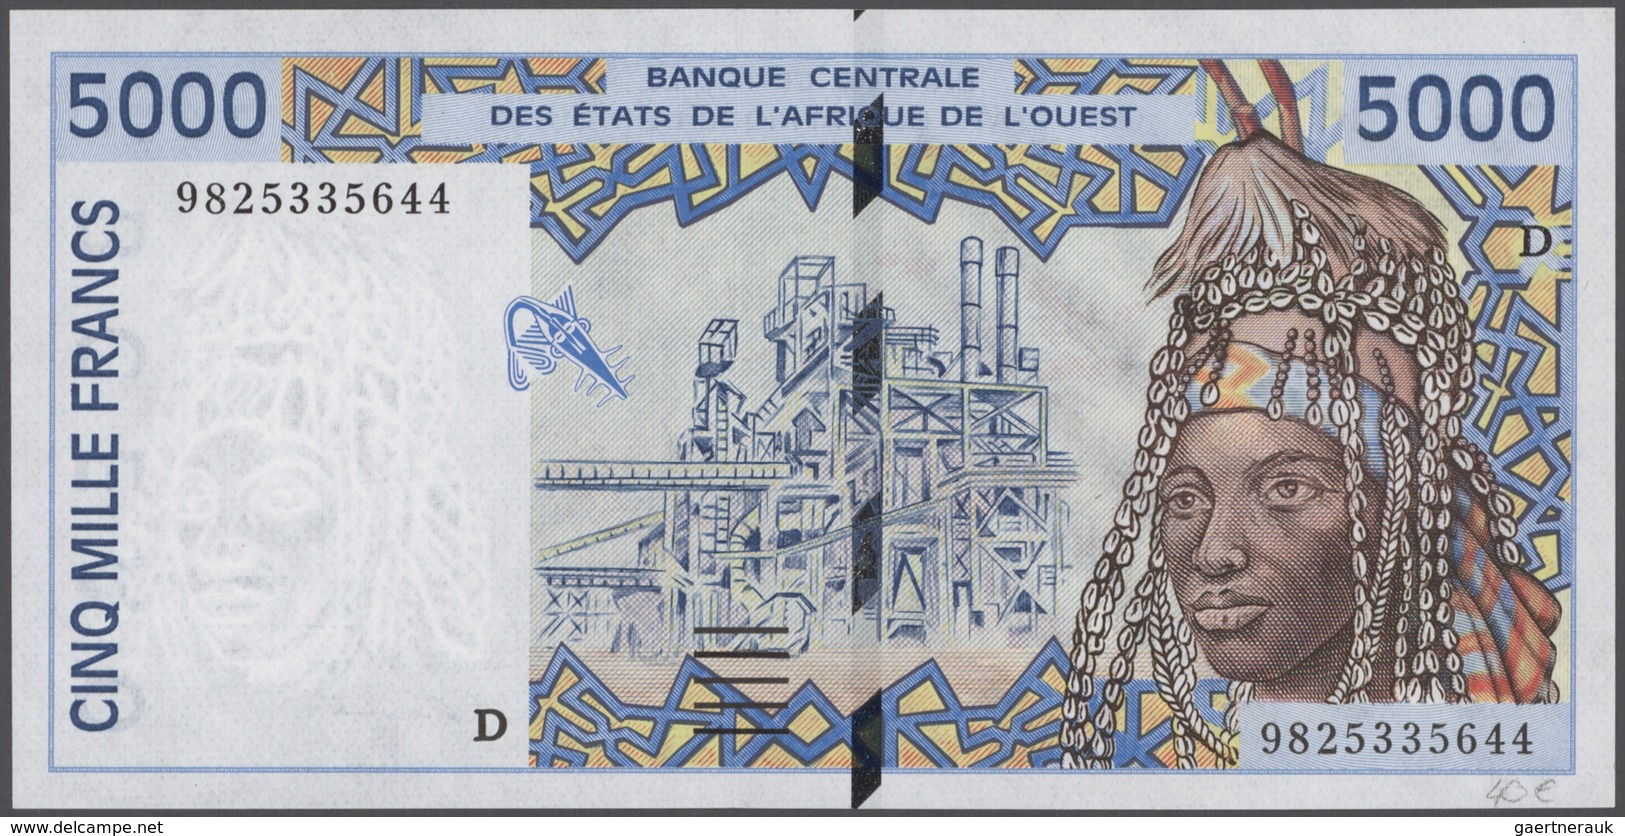 Alle Welt: Collectors album with more than 740 banknotes Ivory Coast, Mali, Madagascar, Malta, Monte